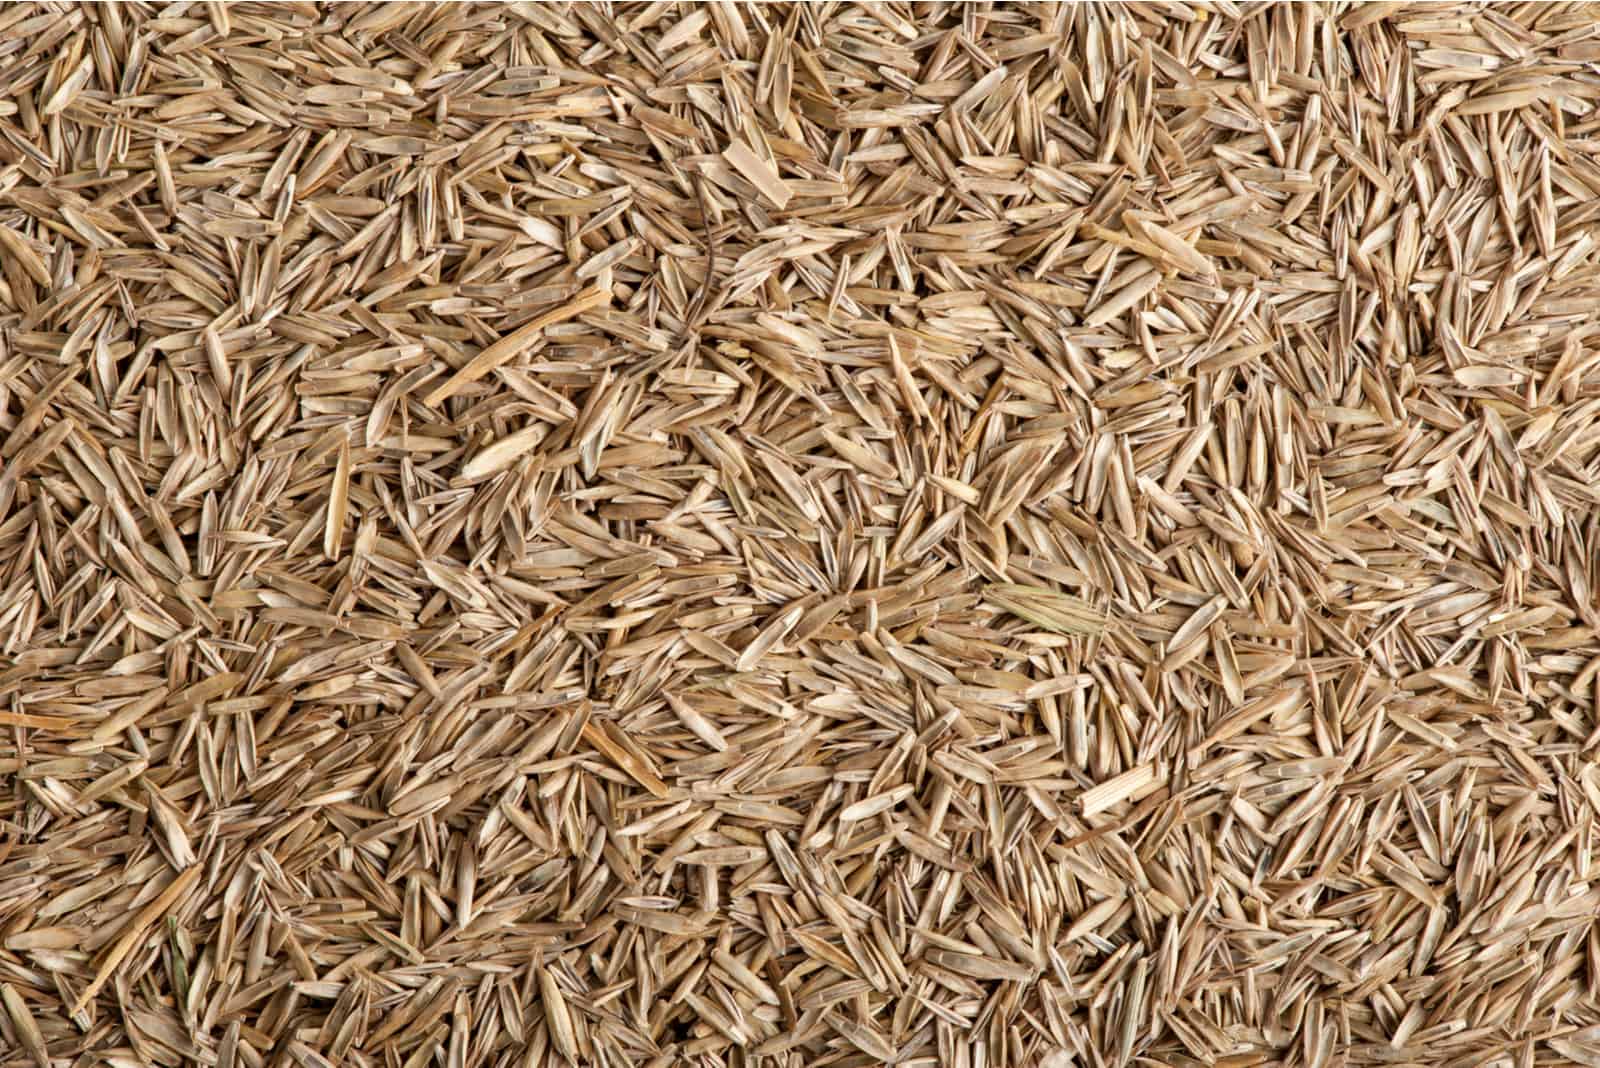 grass seed on table 